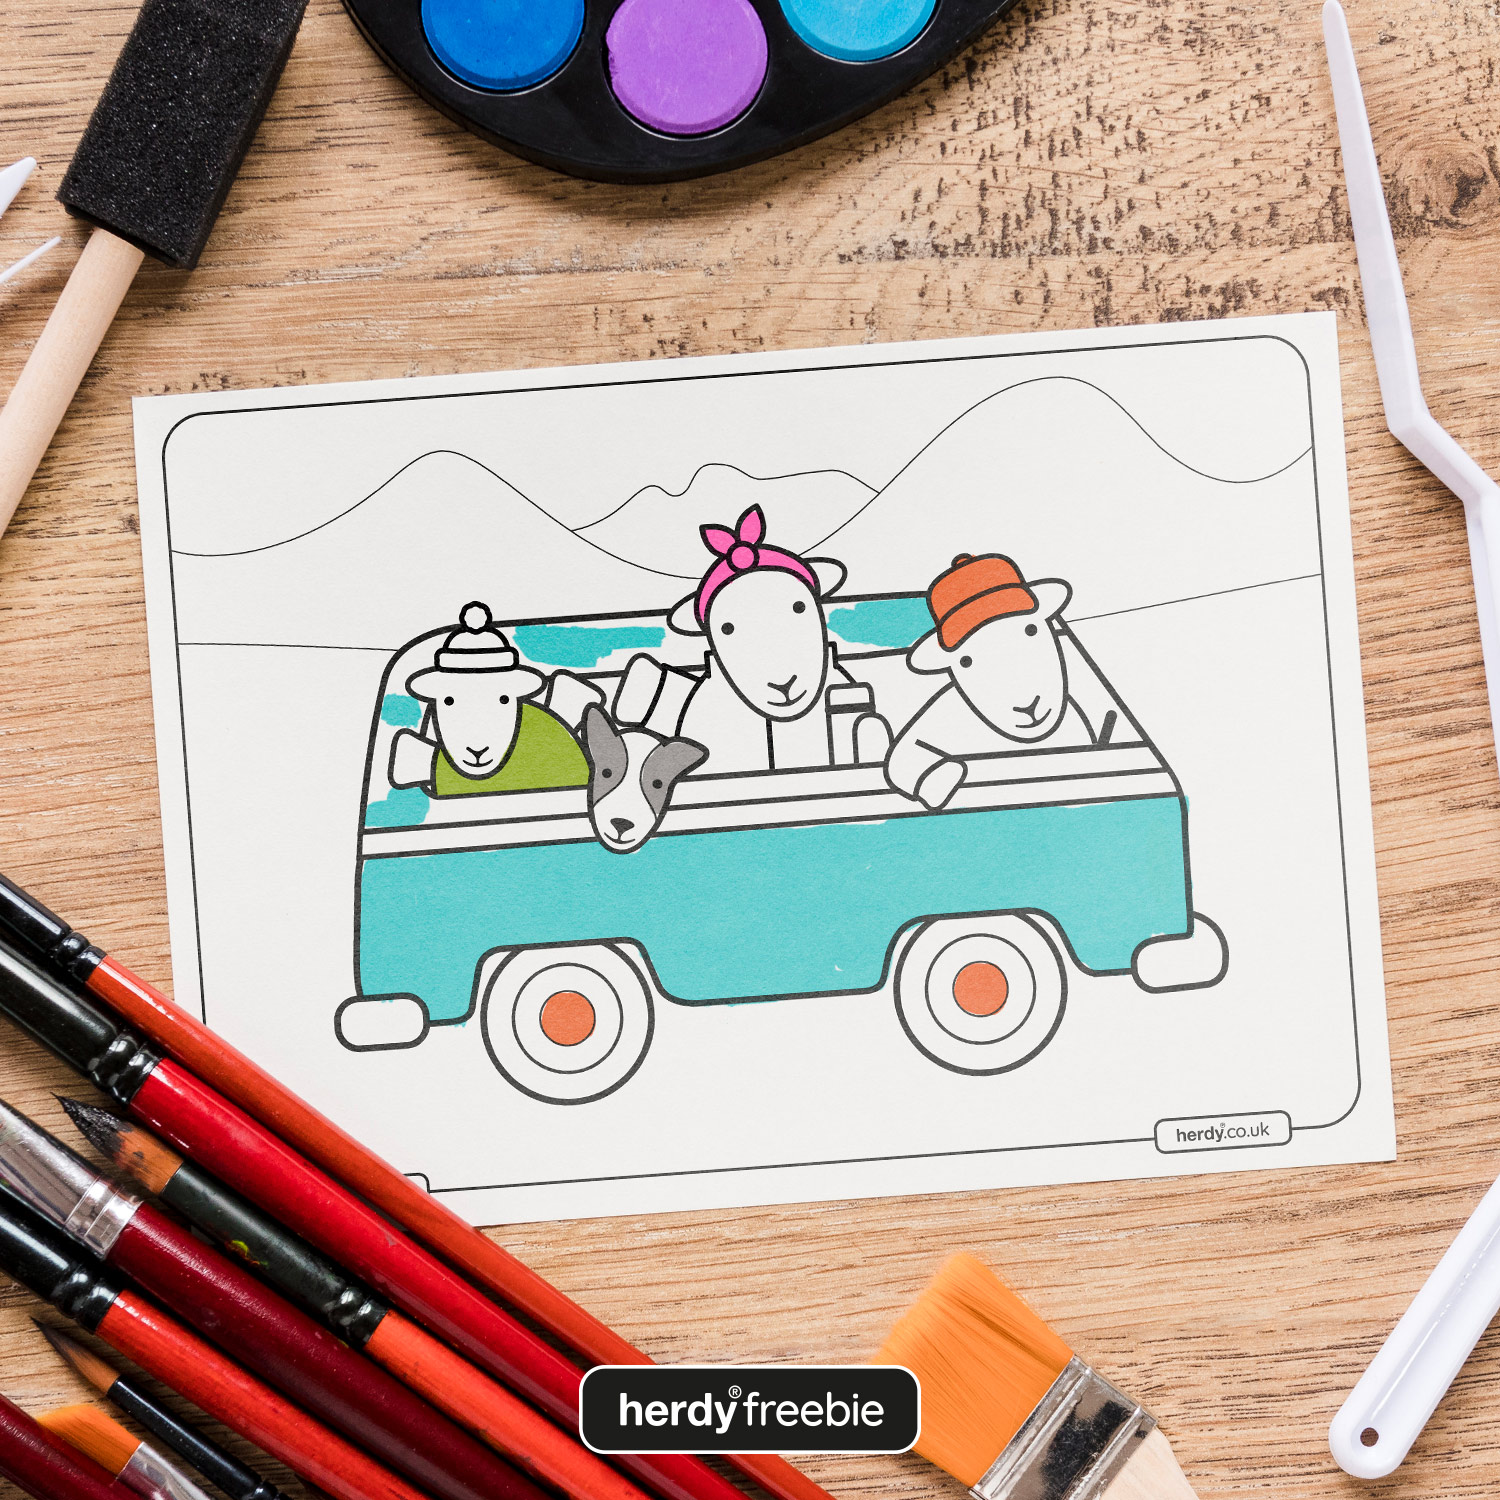 Herdy free coloring in download: image shows Herdy and Sheppy on a Campervan holiday in The Lake District